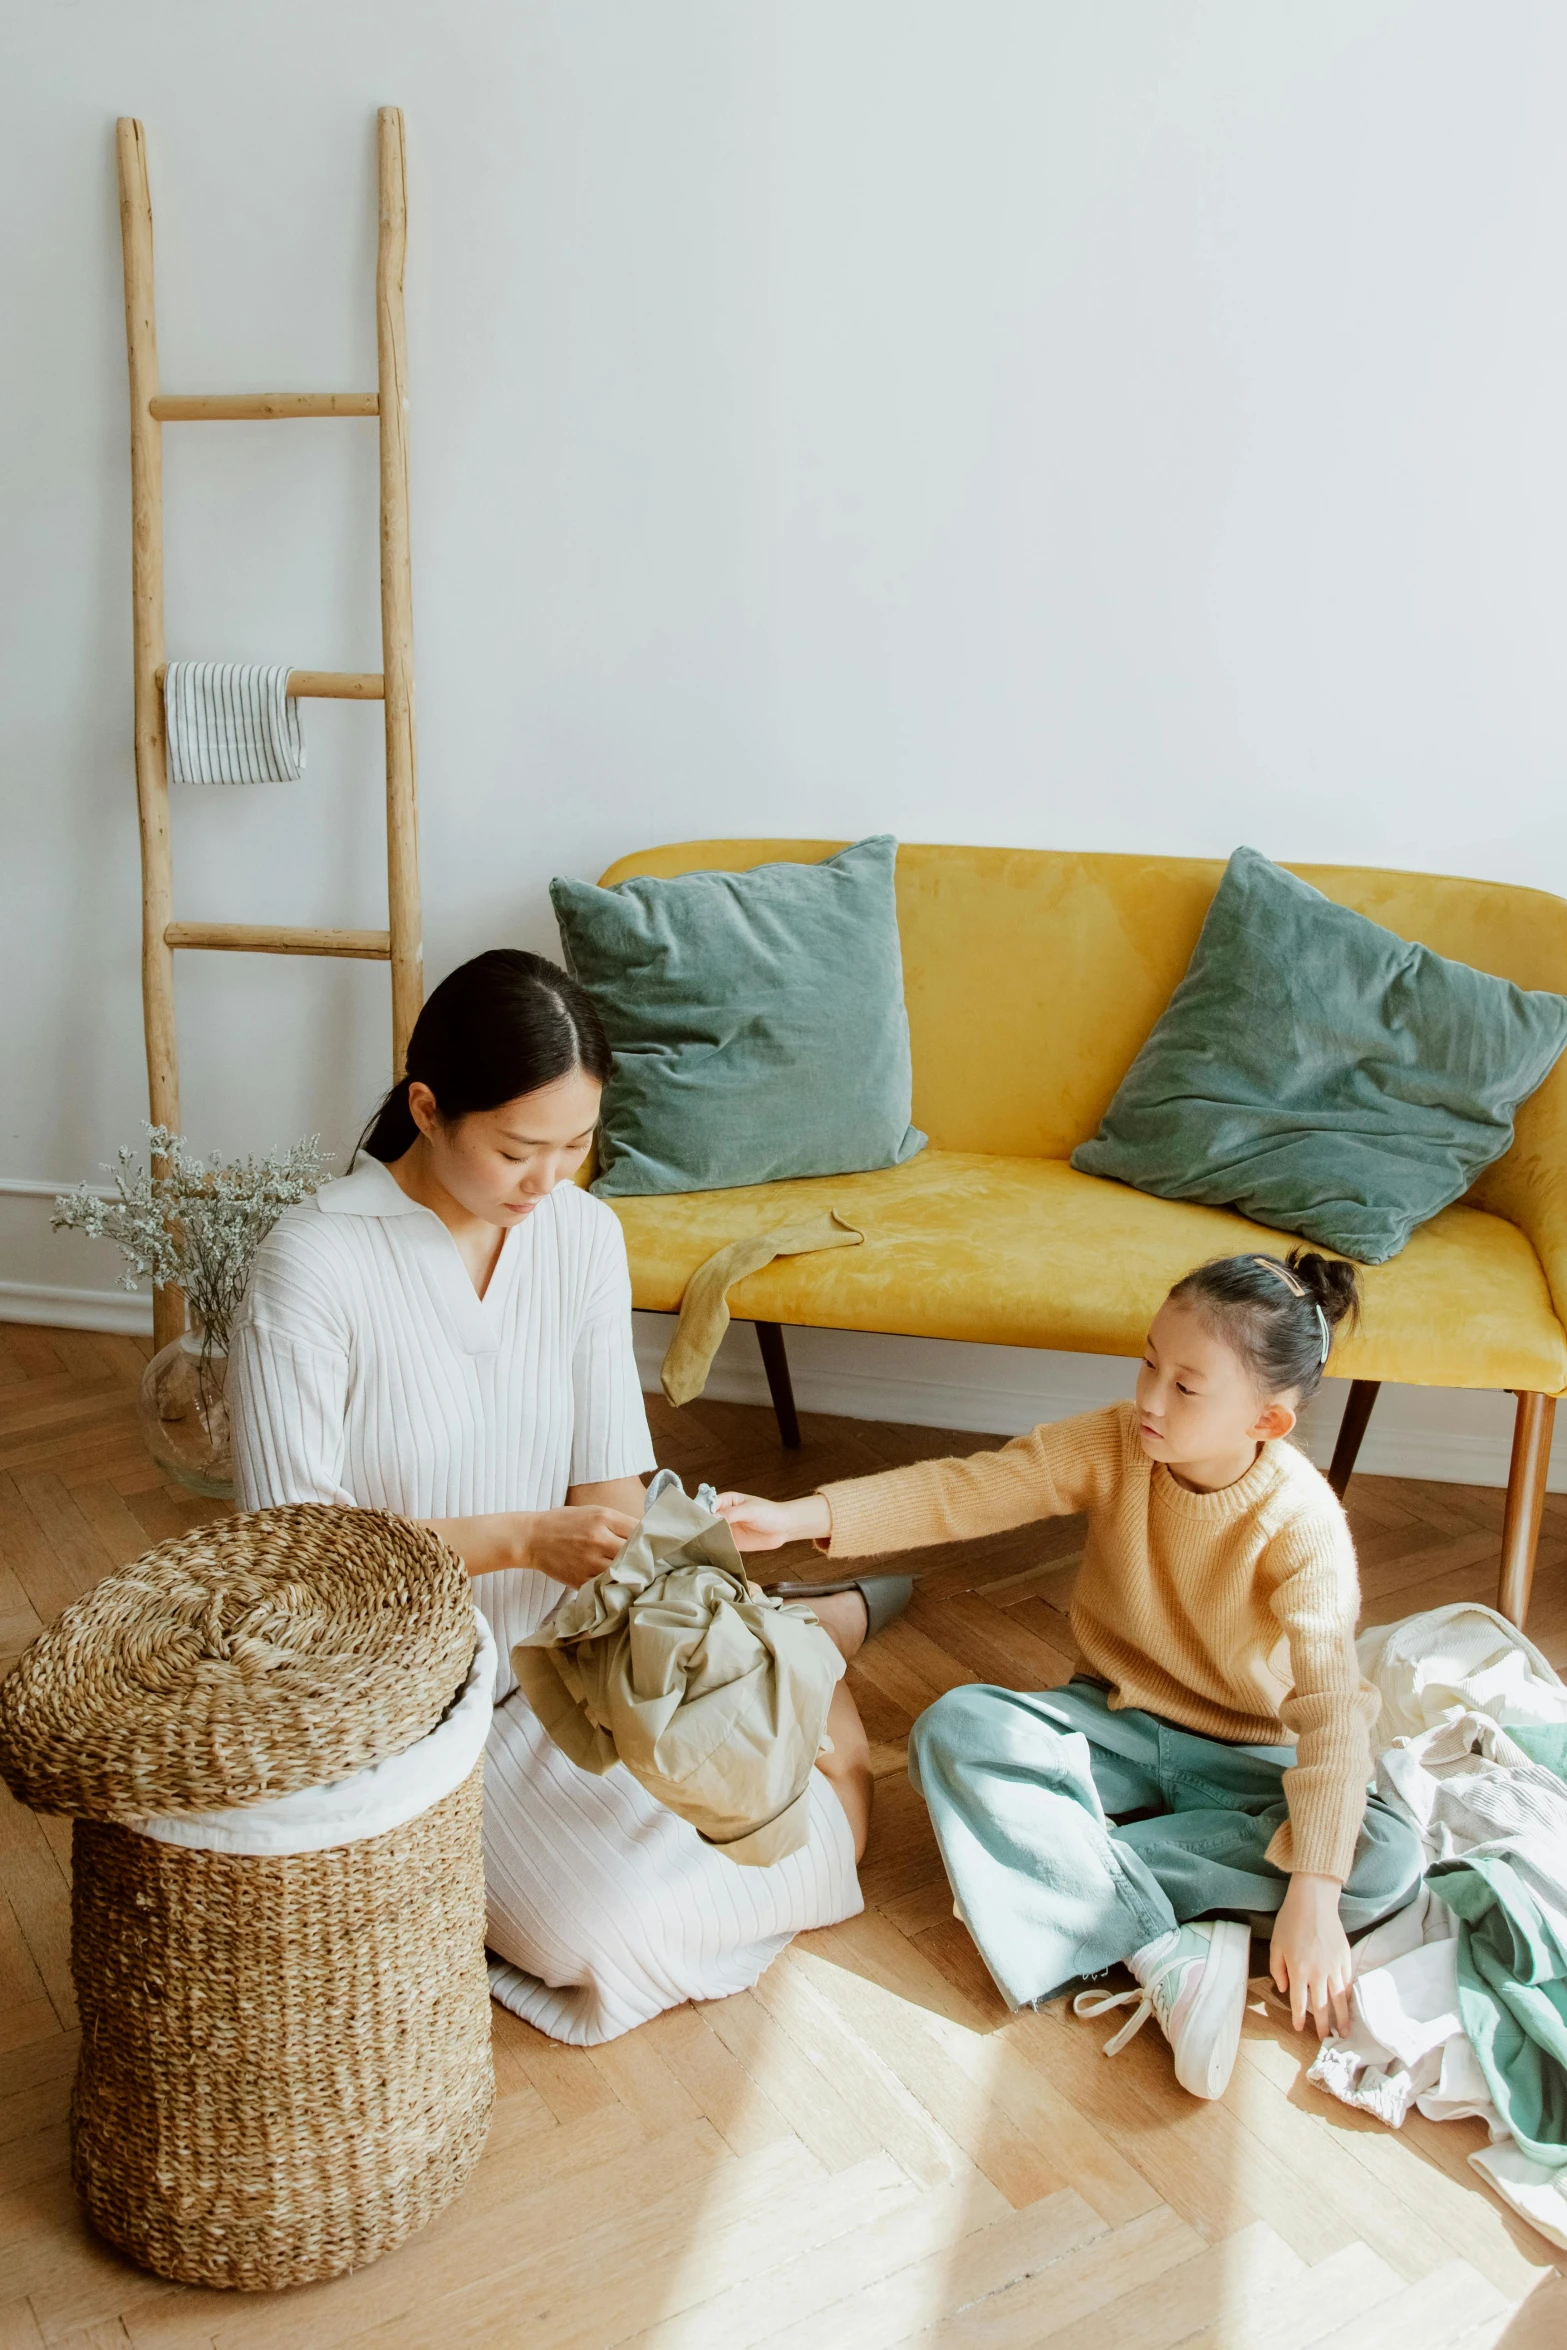 a woman sitting on the floor next to a child, pexels contest winner, minimalism, presenting wares, at the sitting couch, promotional image, asian descent